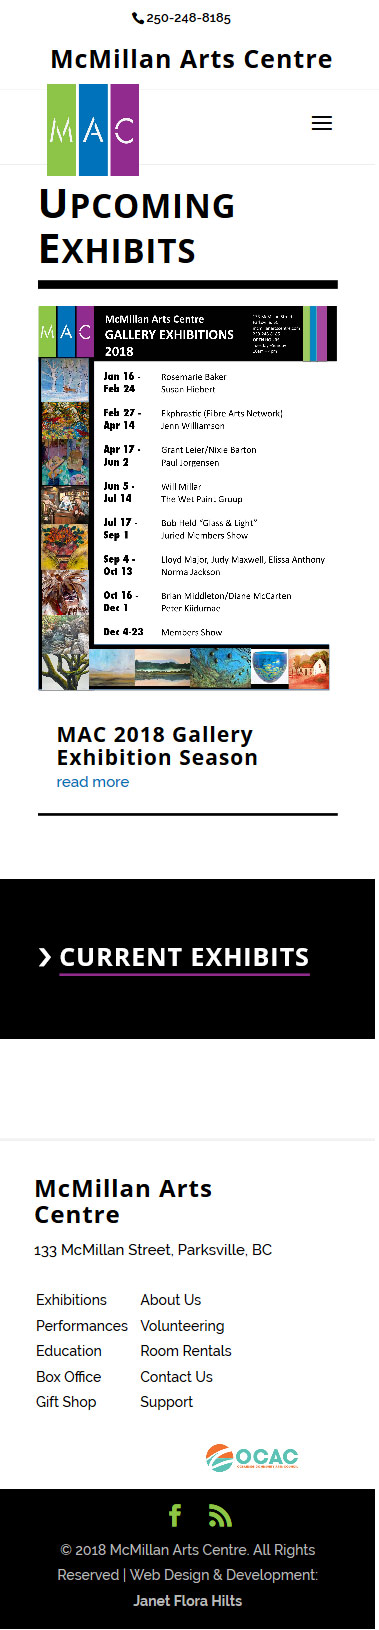 Upcoming exhibits page in mobile view